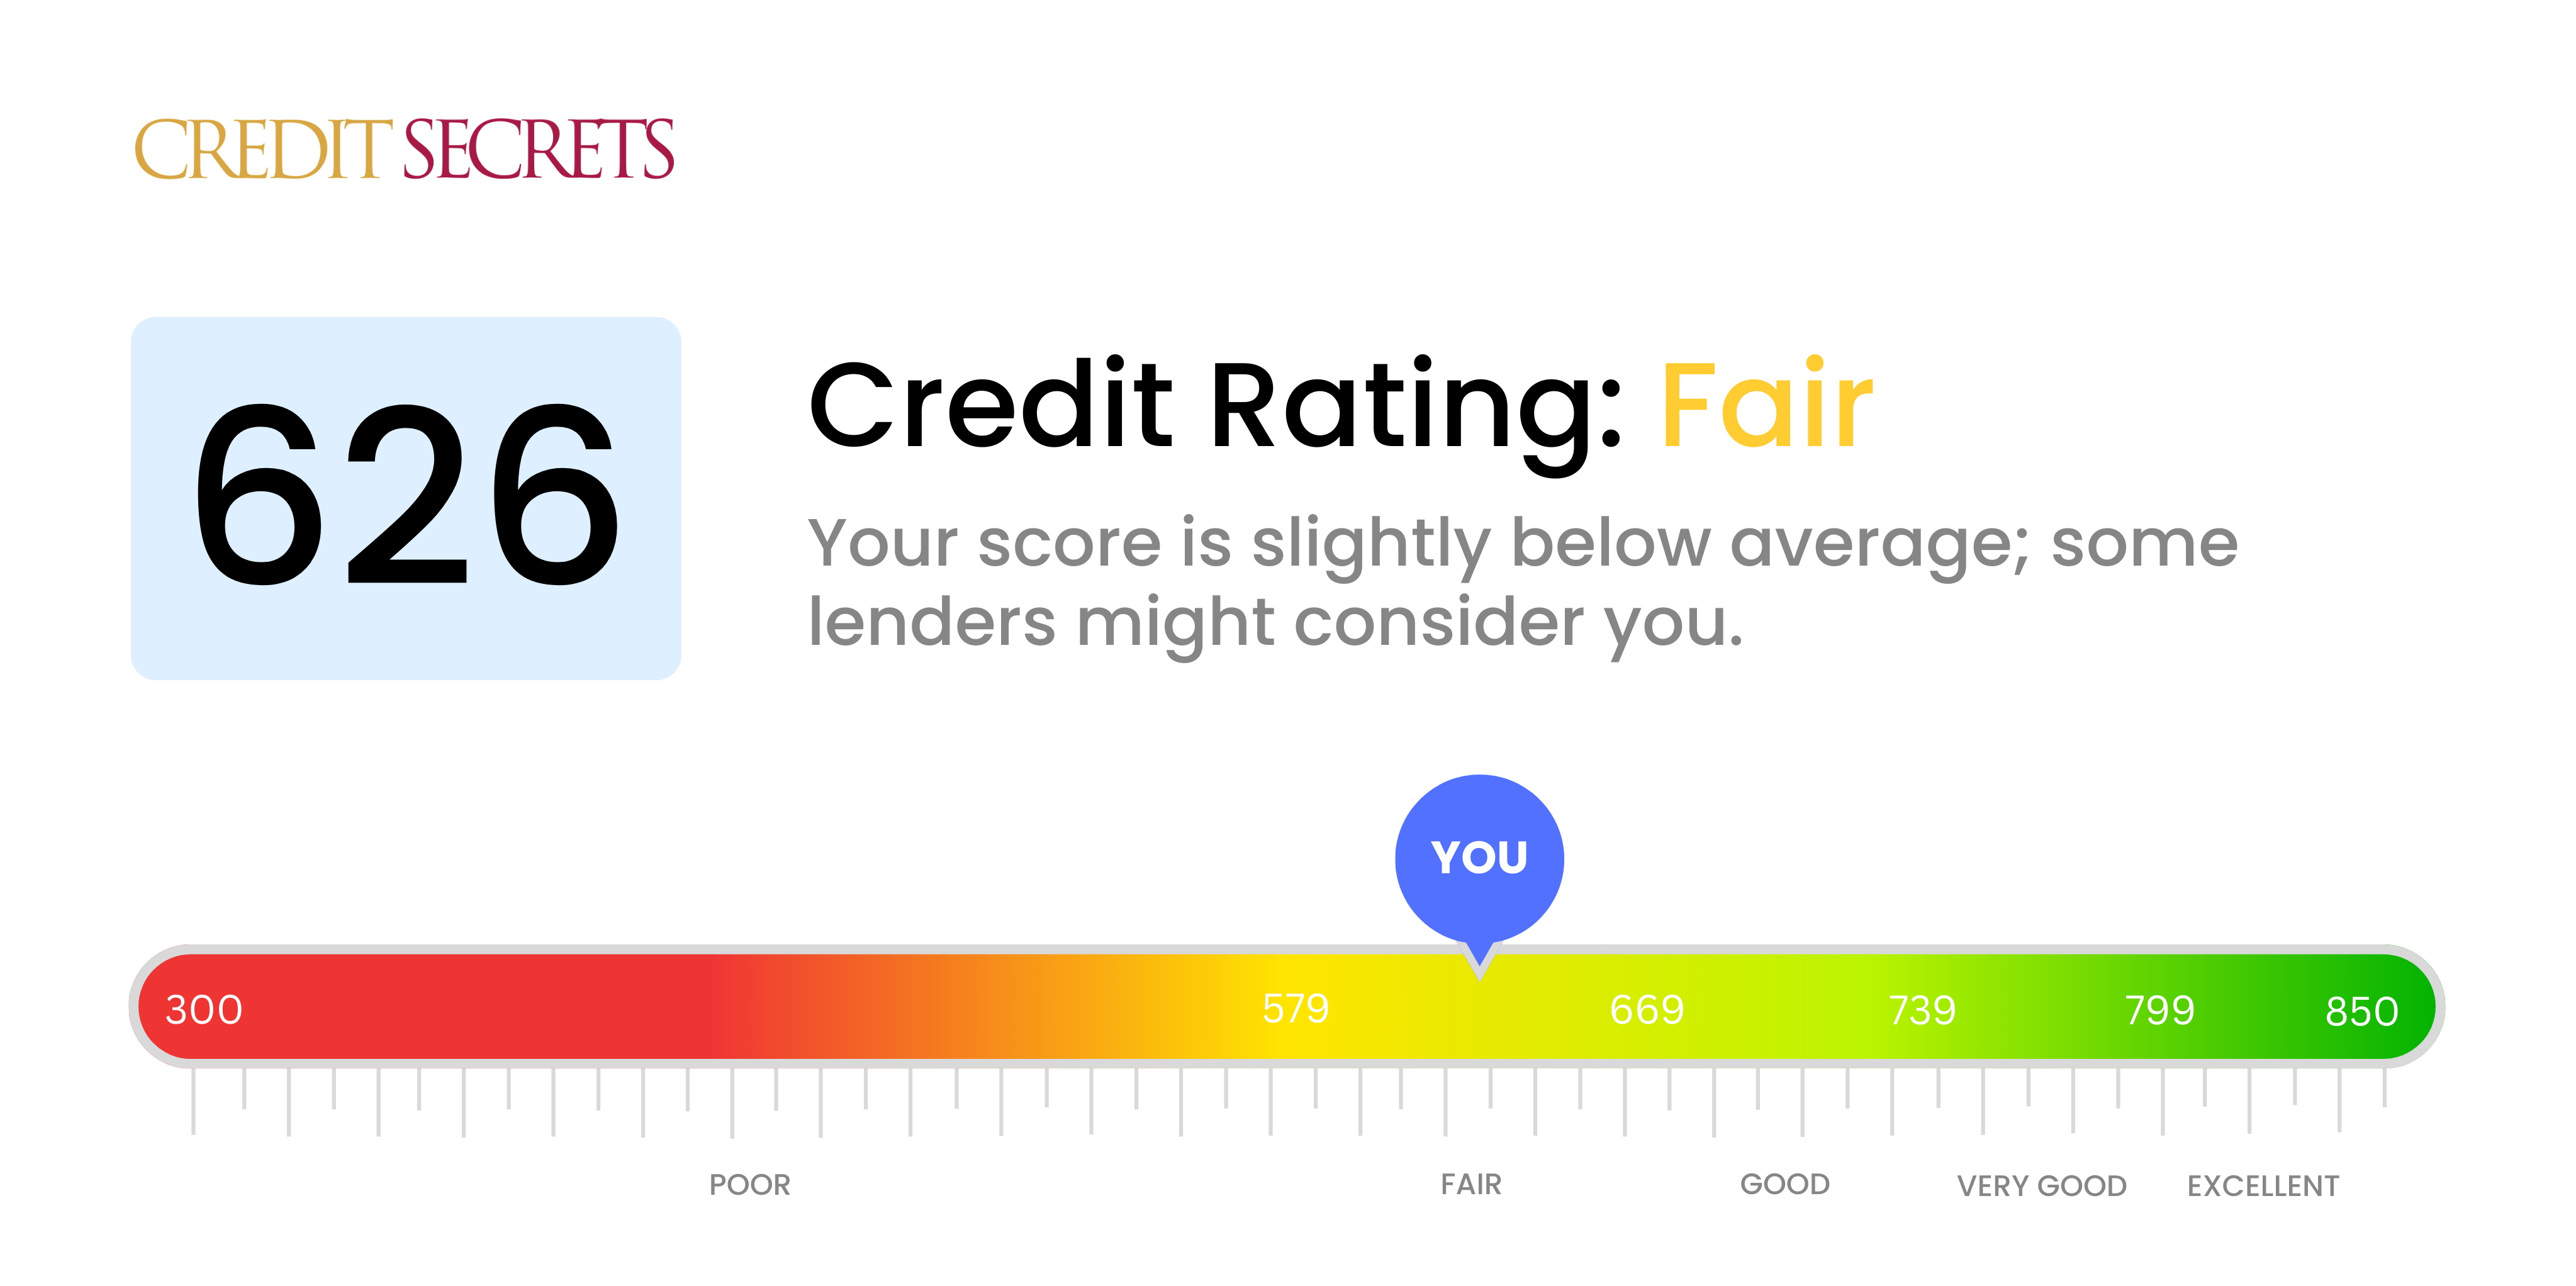 Is 626 a good credit score?